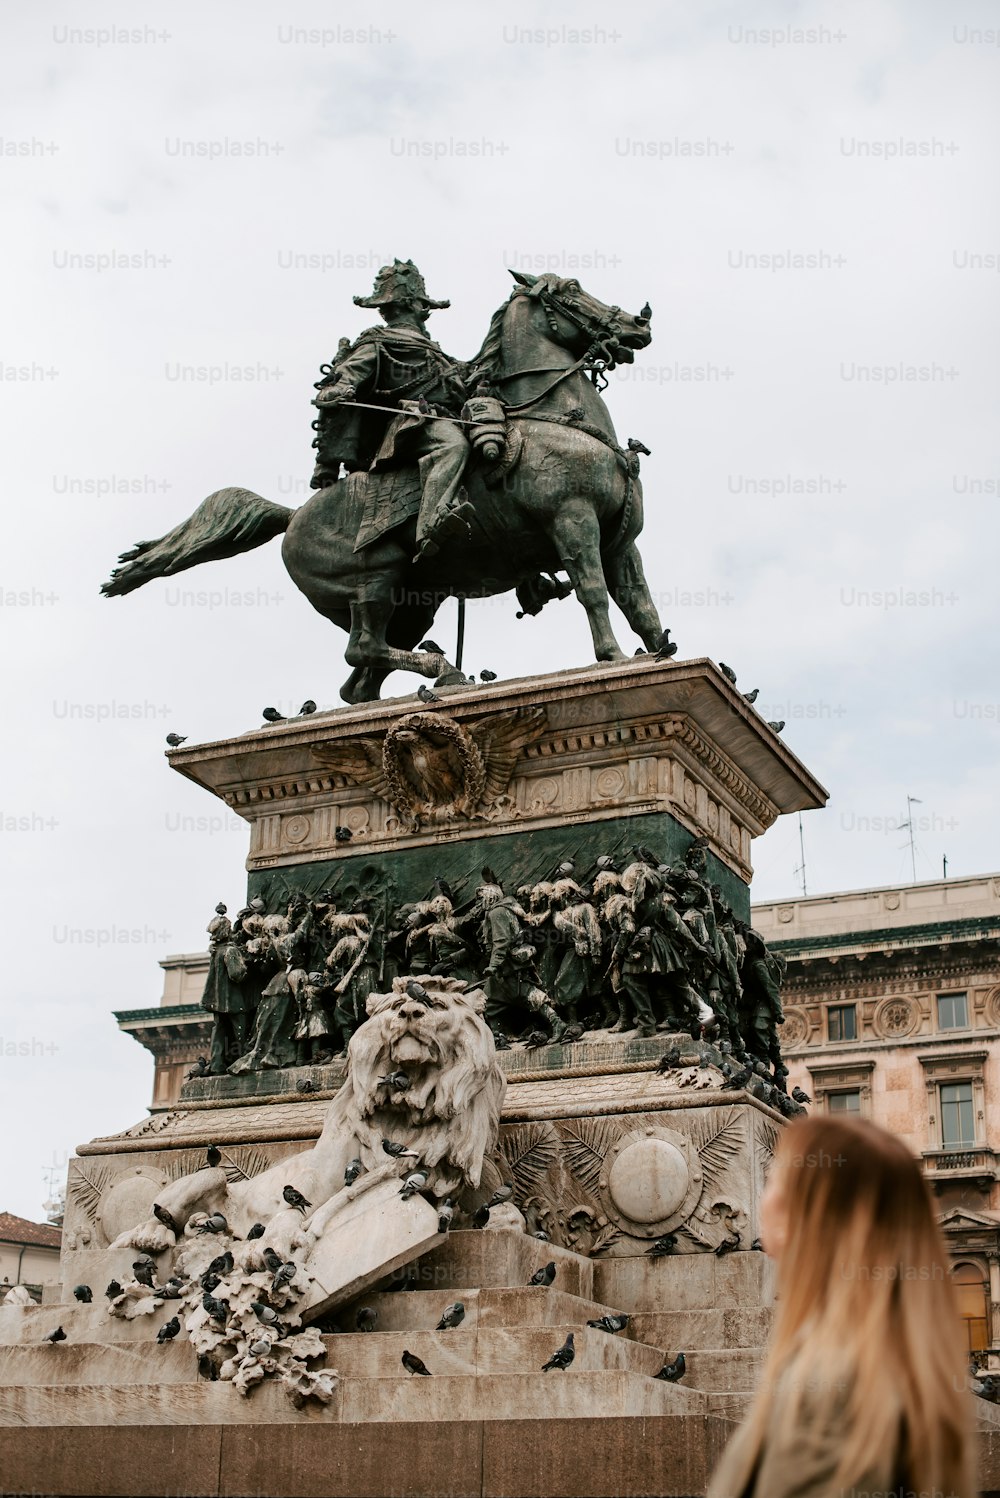 a statue of a man on a horse on a pedestal